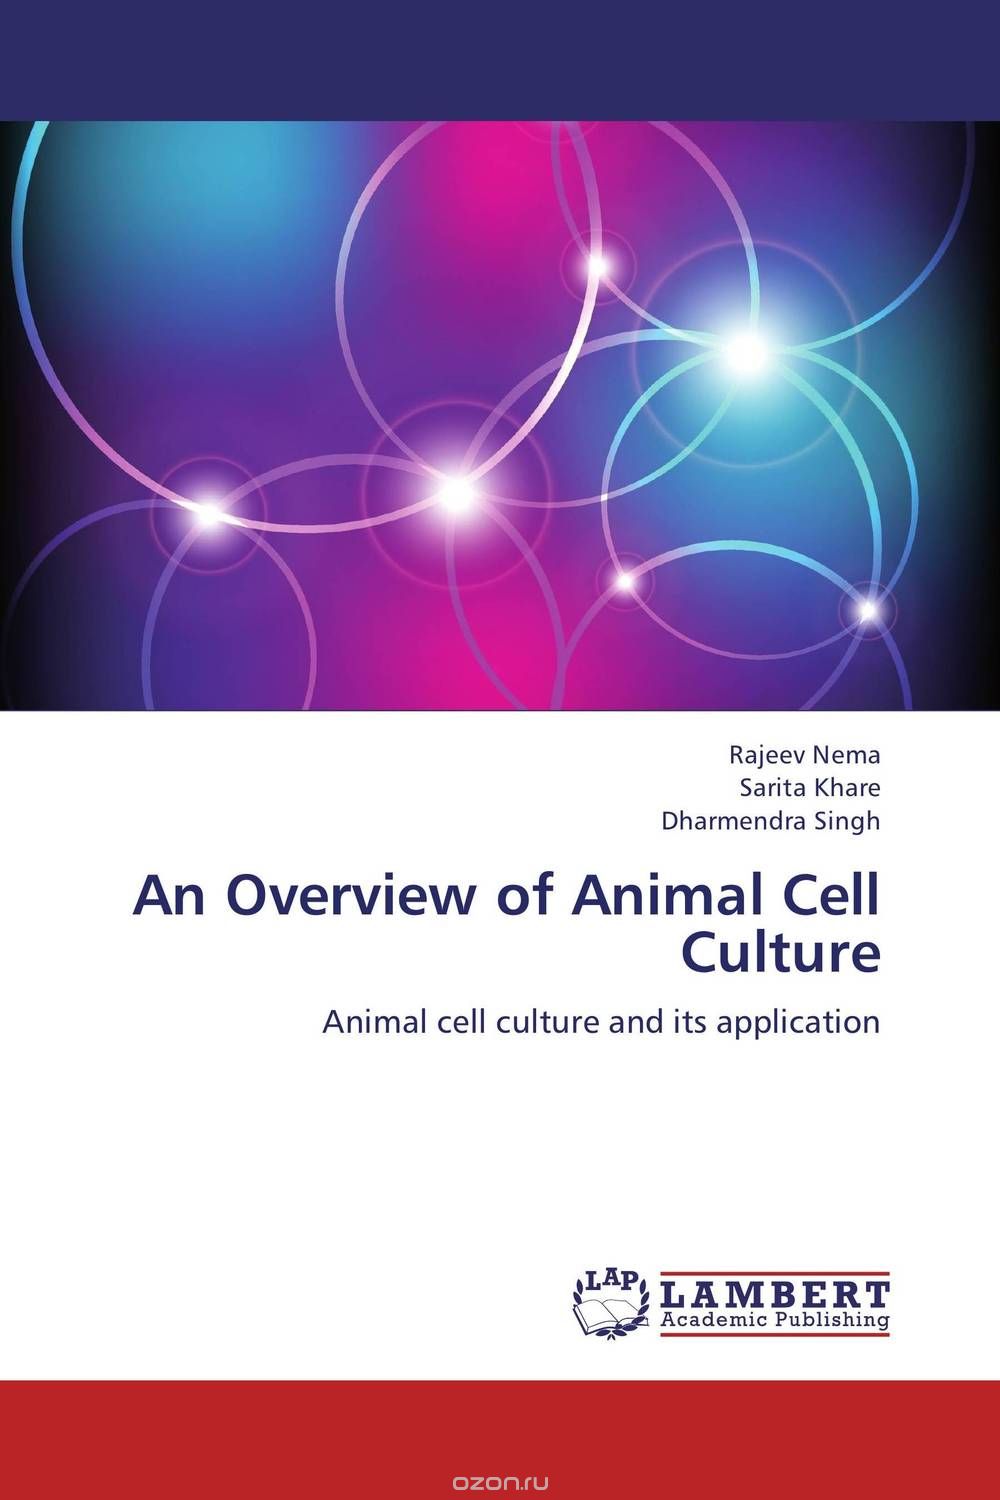 Скачать книгу "An Overview of Animal Cell Culture"